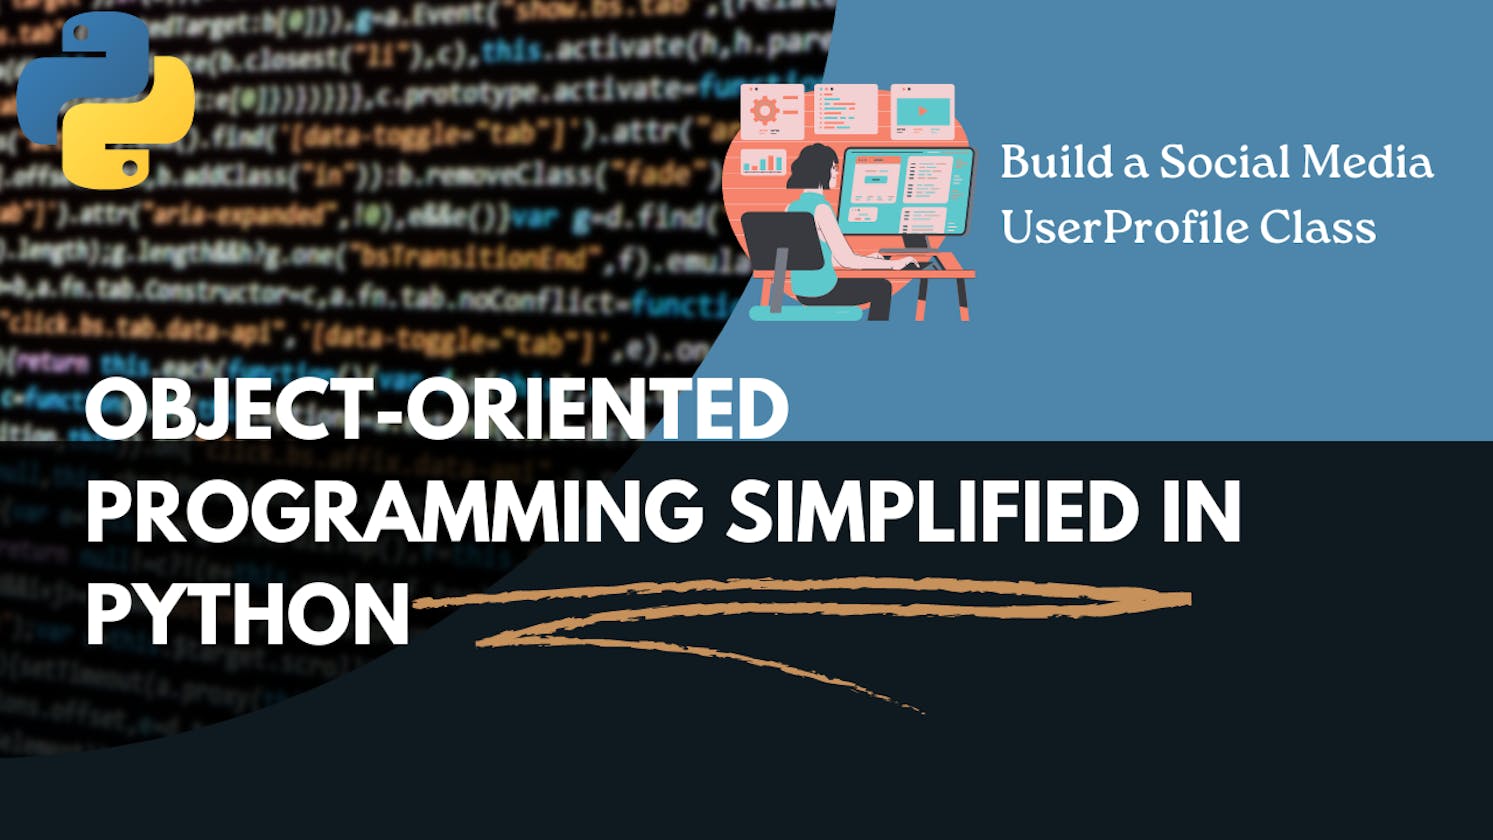 Object-Oriented Programming Simplified in Python: Building a Social Media UserProfile Class